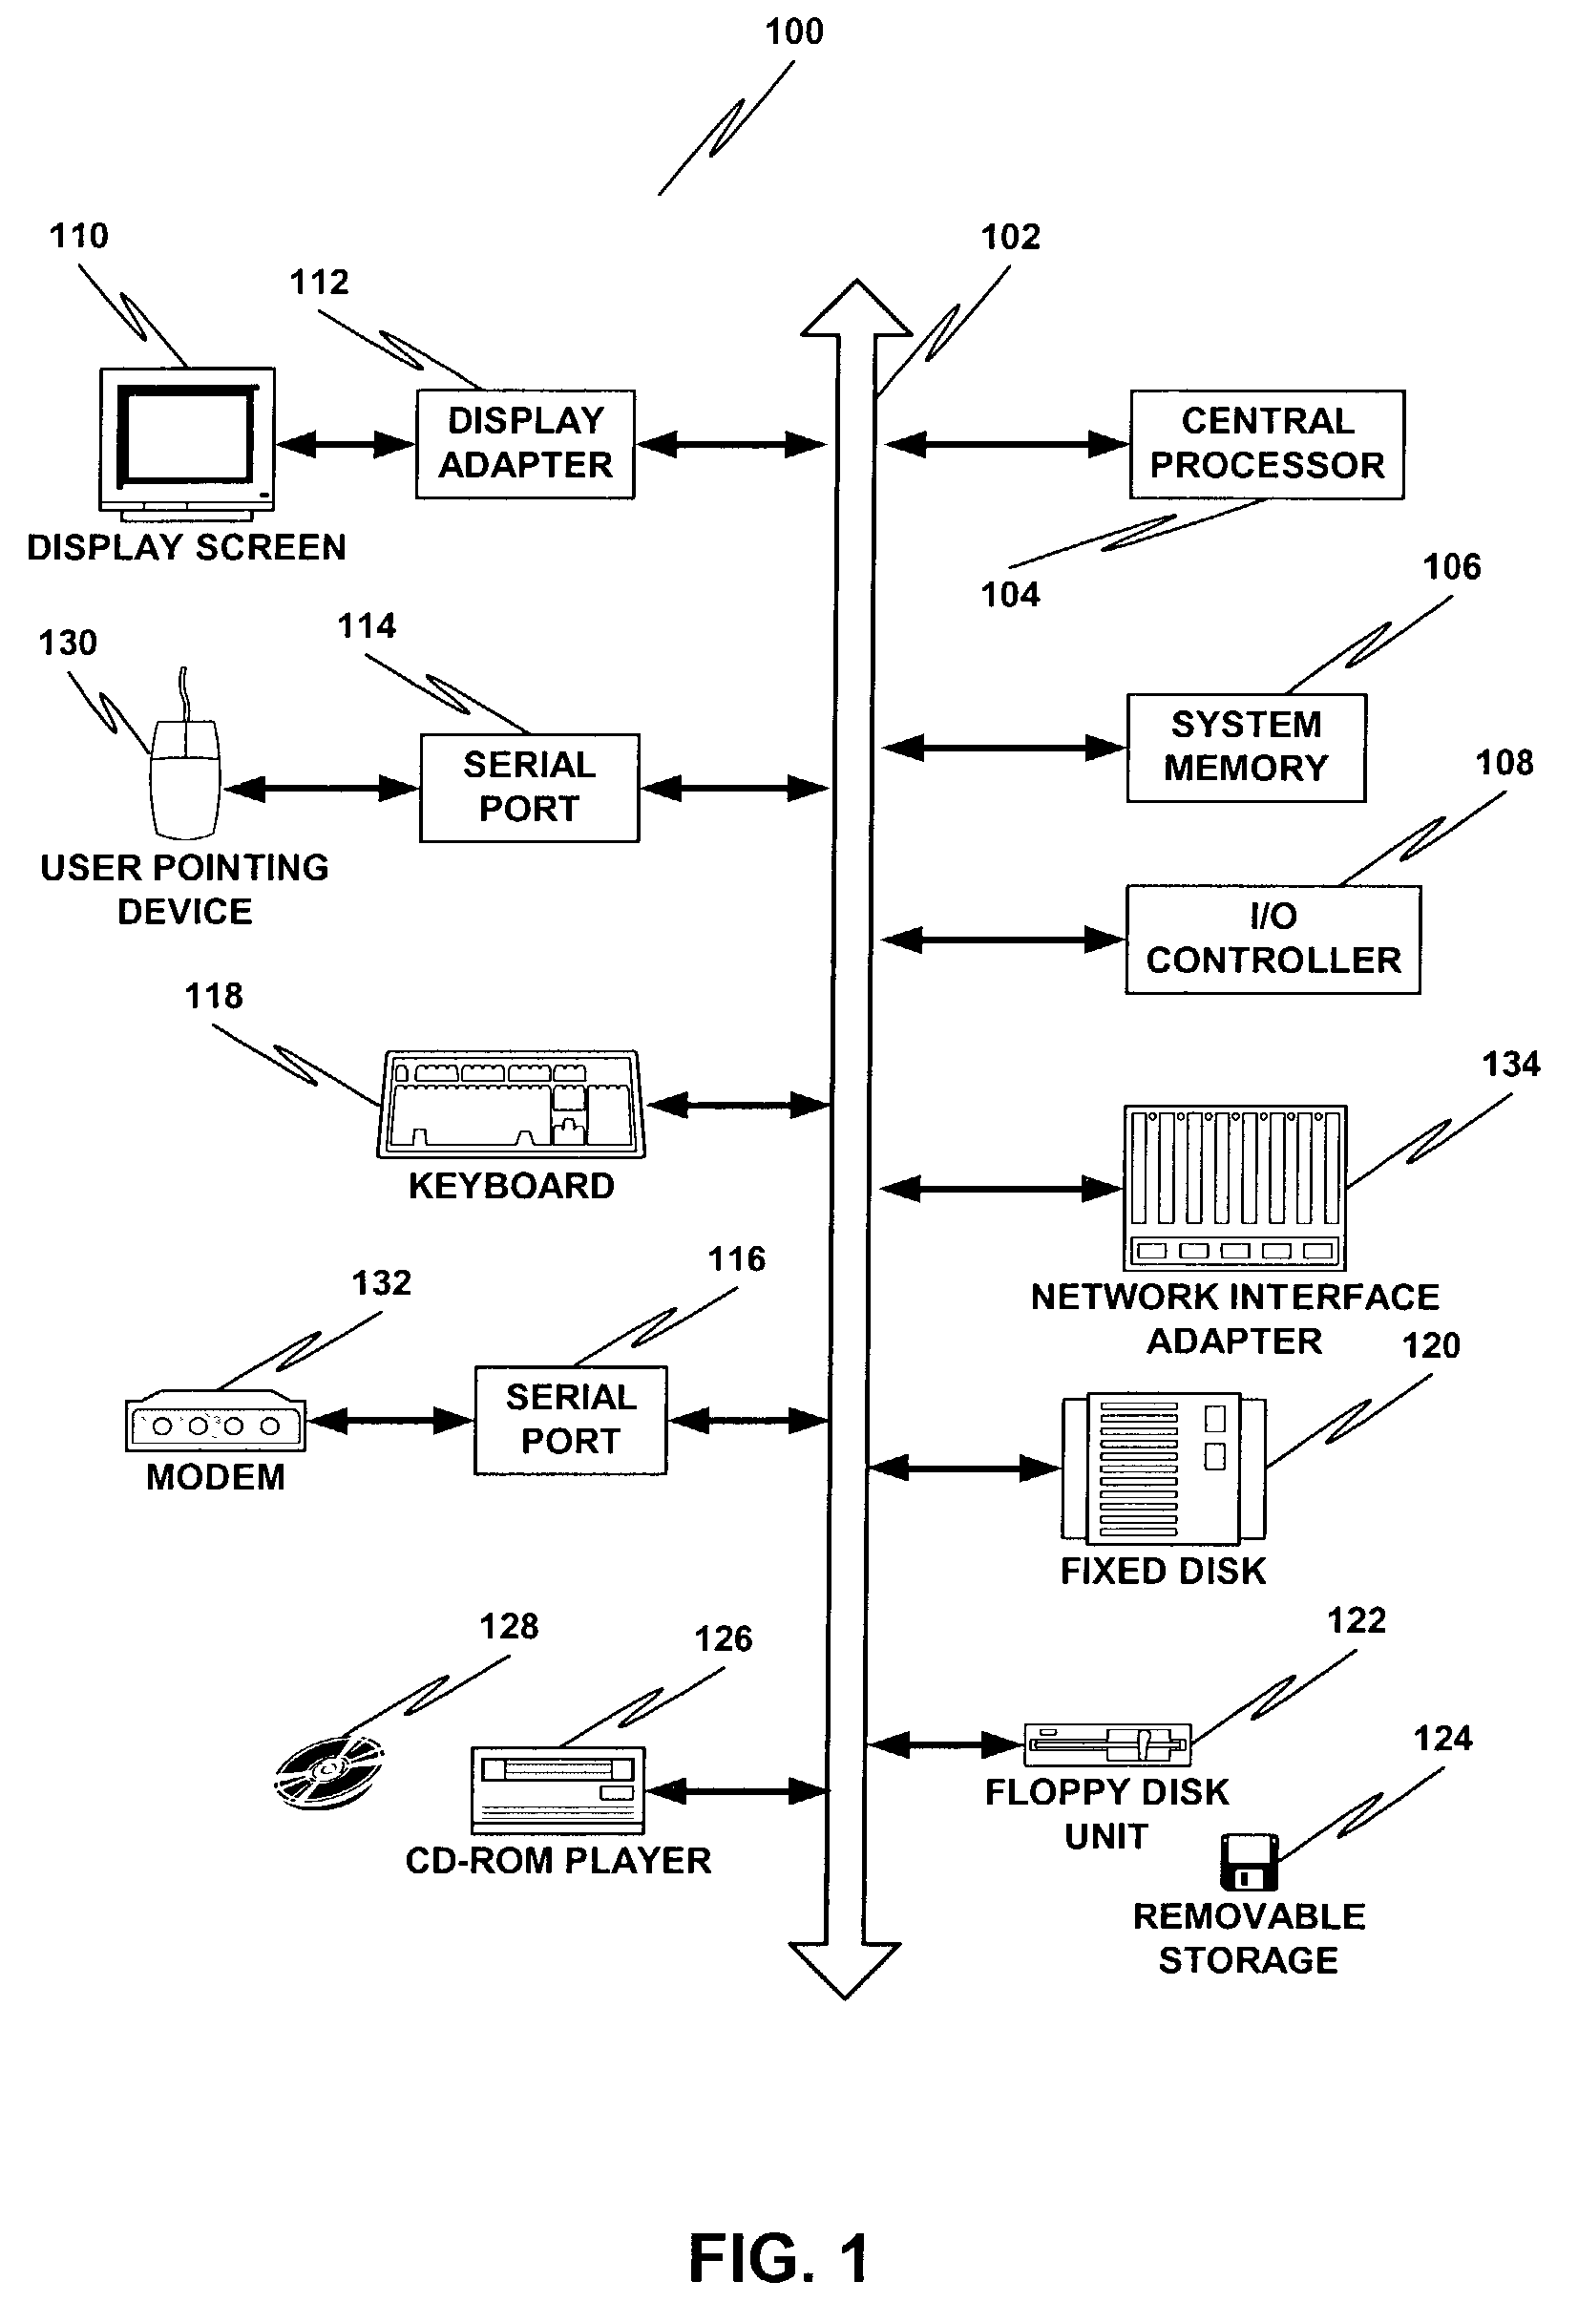 Detecting and transporting dynamic presence information over a wireless and wireline communications network